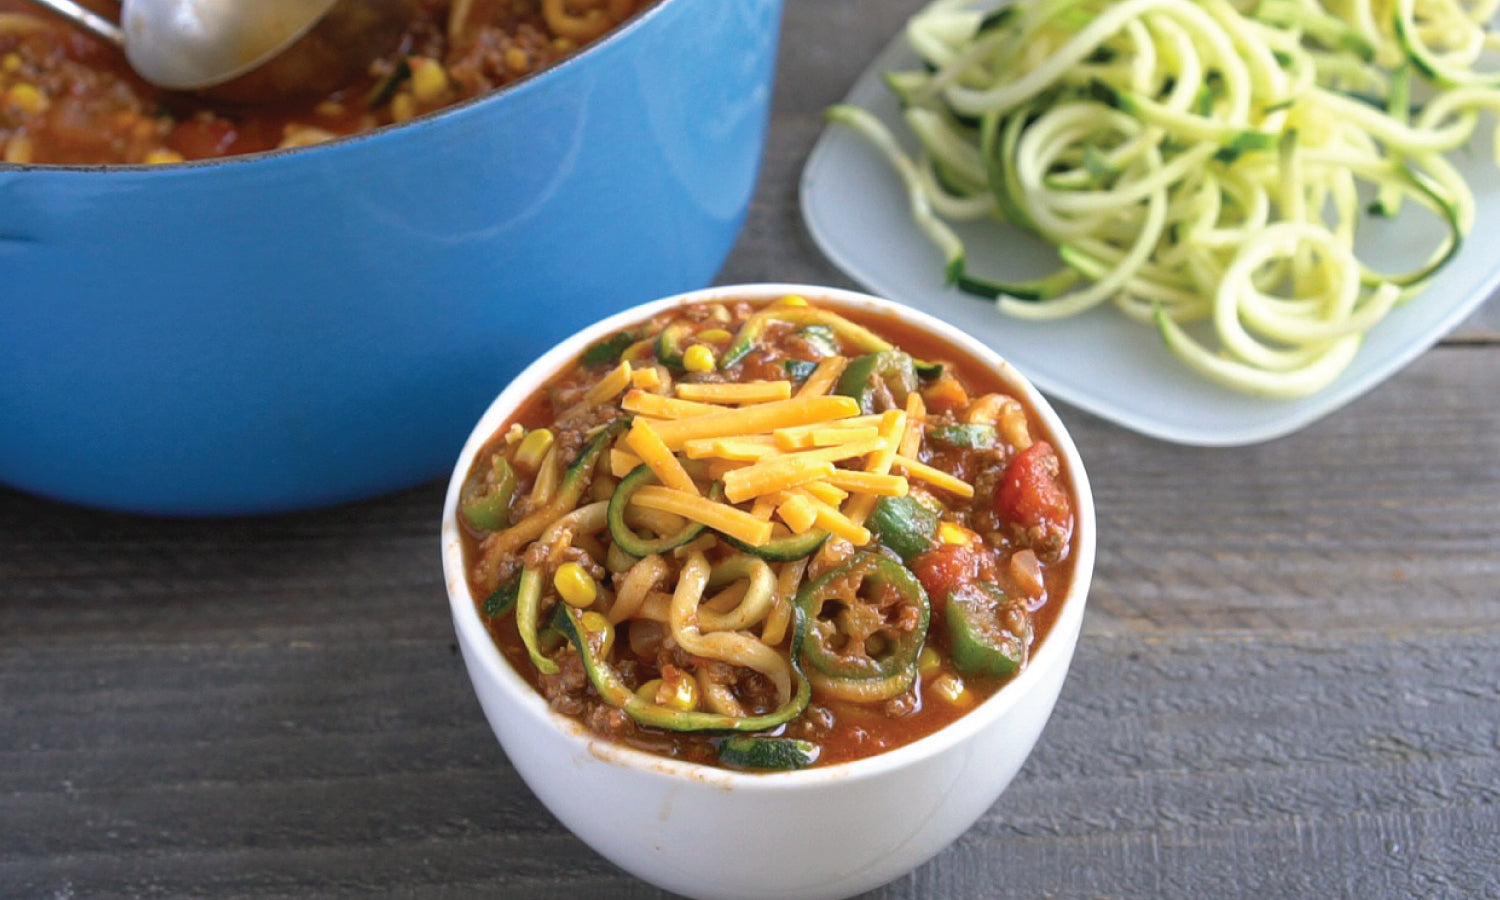 https://www.southernplate.com/healthy-goulash-with-zoodles/